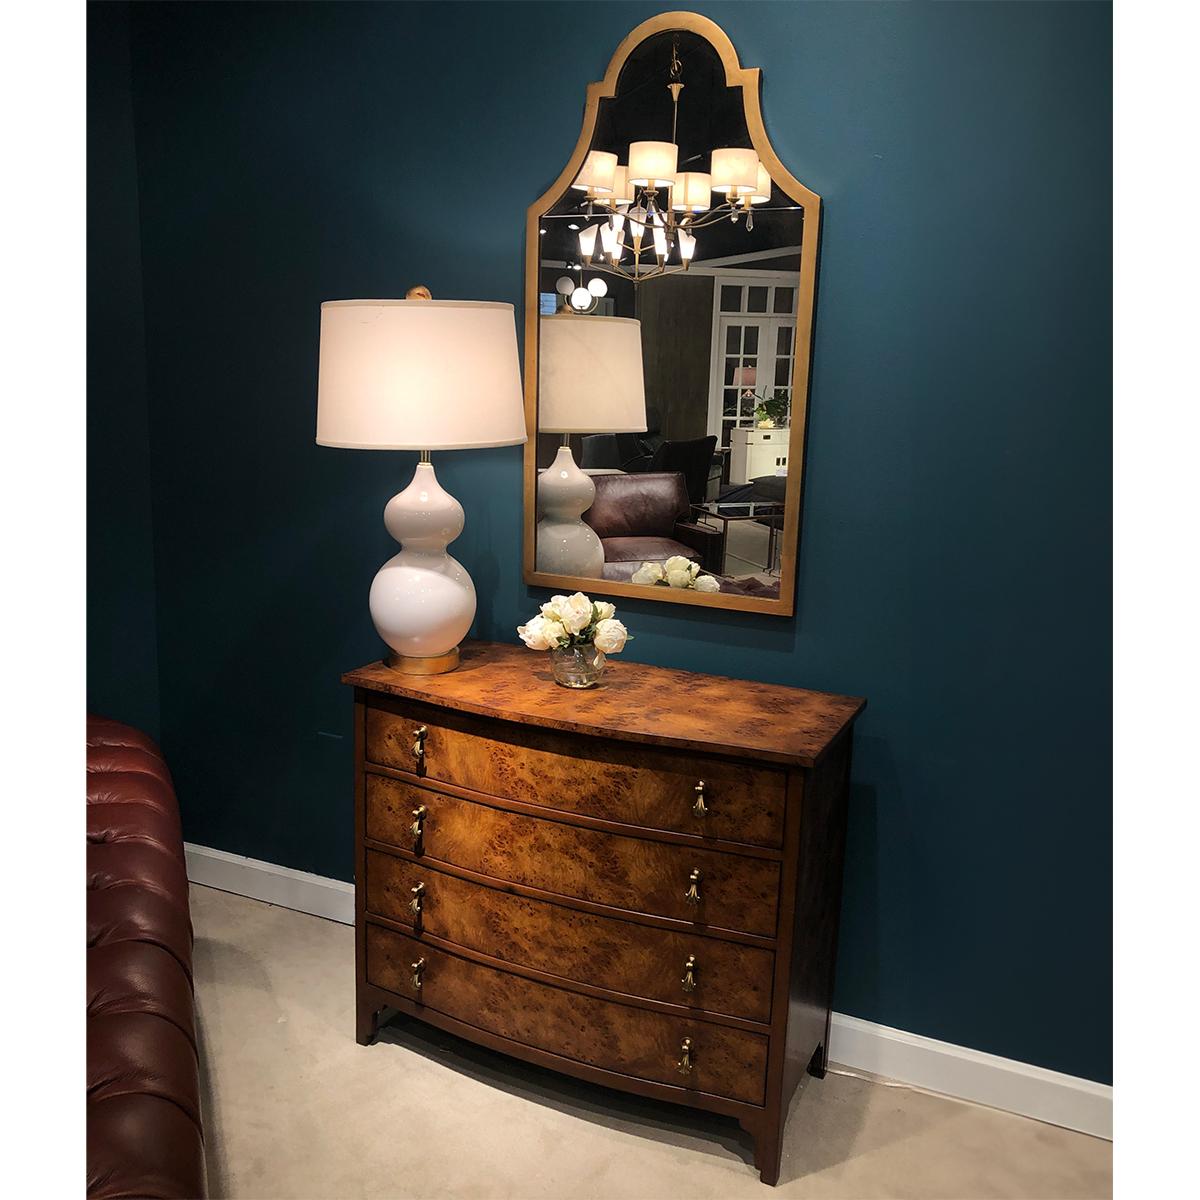 English Burl Bowfront Chest with four drawers and hand-cast polished brass flourish hardware. With a hand-rubbed rustic burl mappa veneer. 

Dimensions: 40